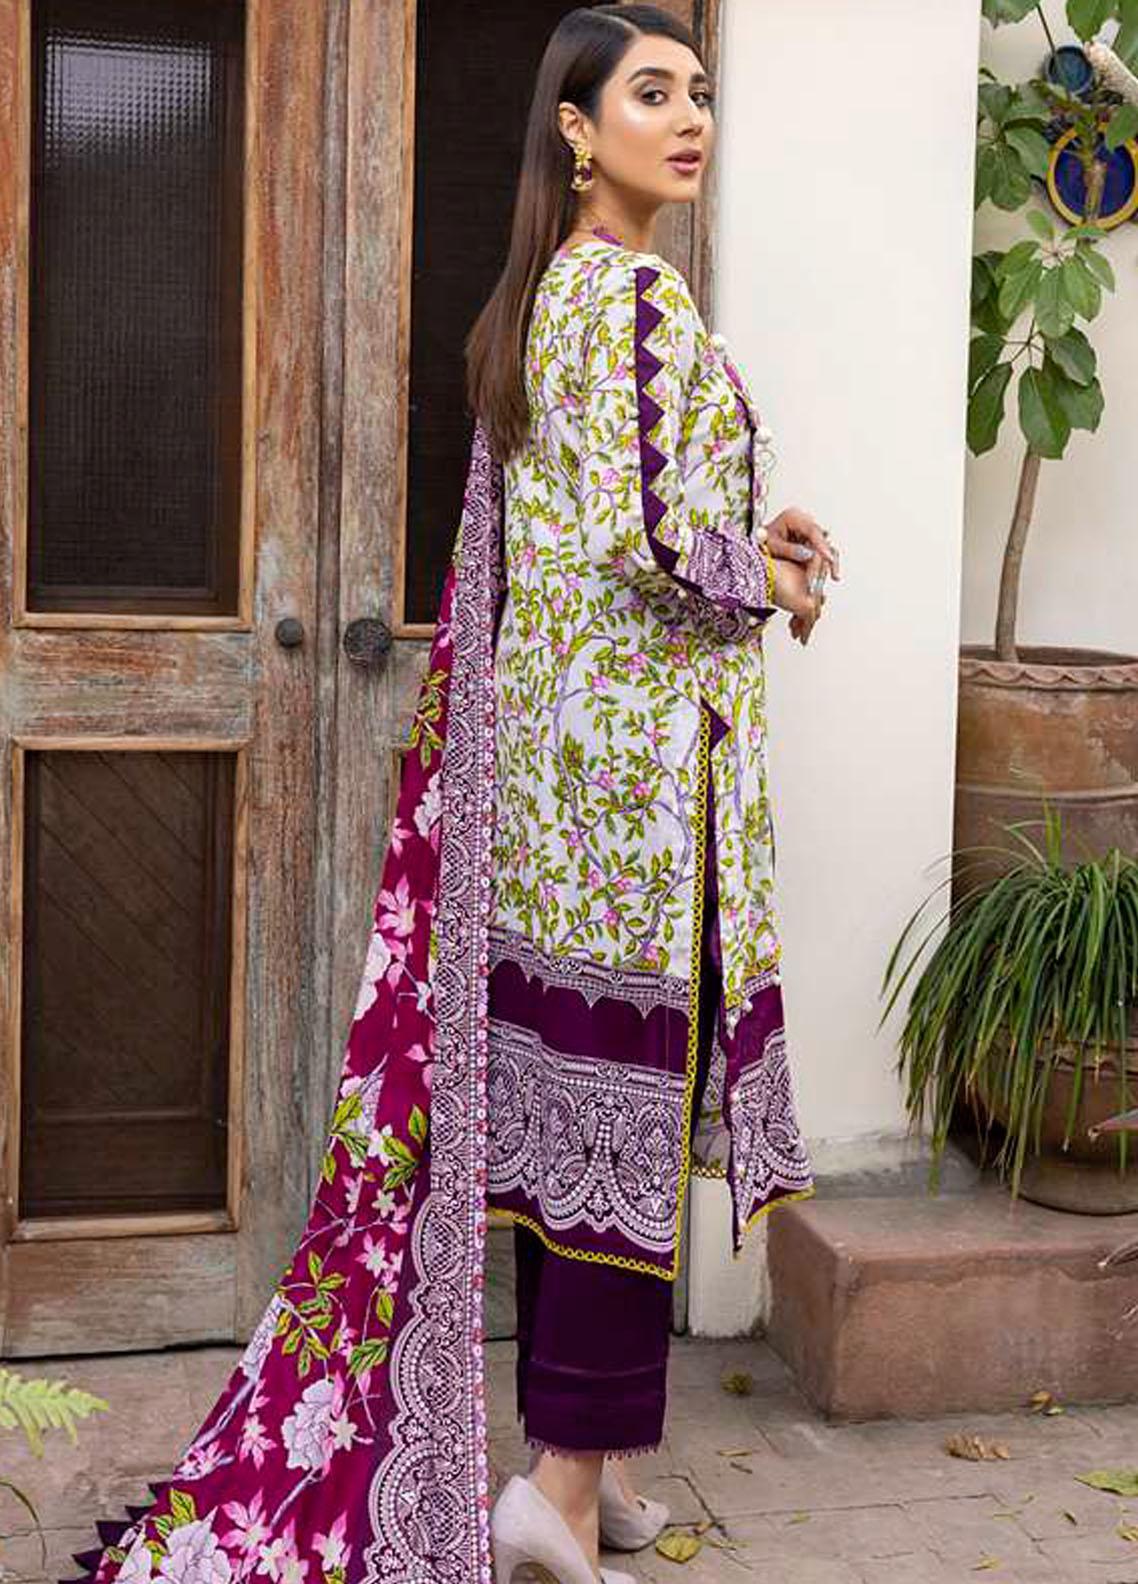 Monsoon Bahar By Al Zohaib Printed Lawn Suits Unstitched 3 Piece - 3B - Summer Collection